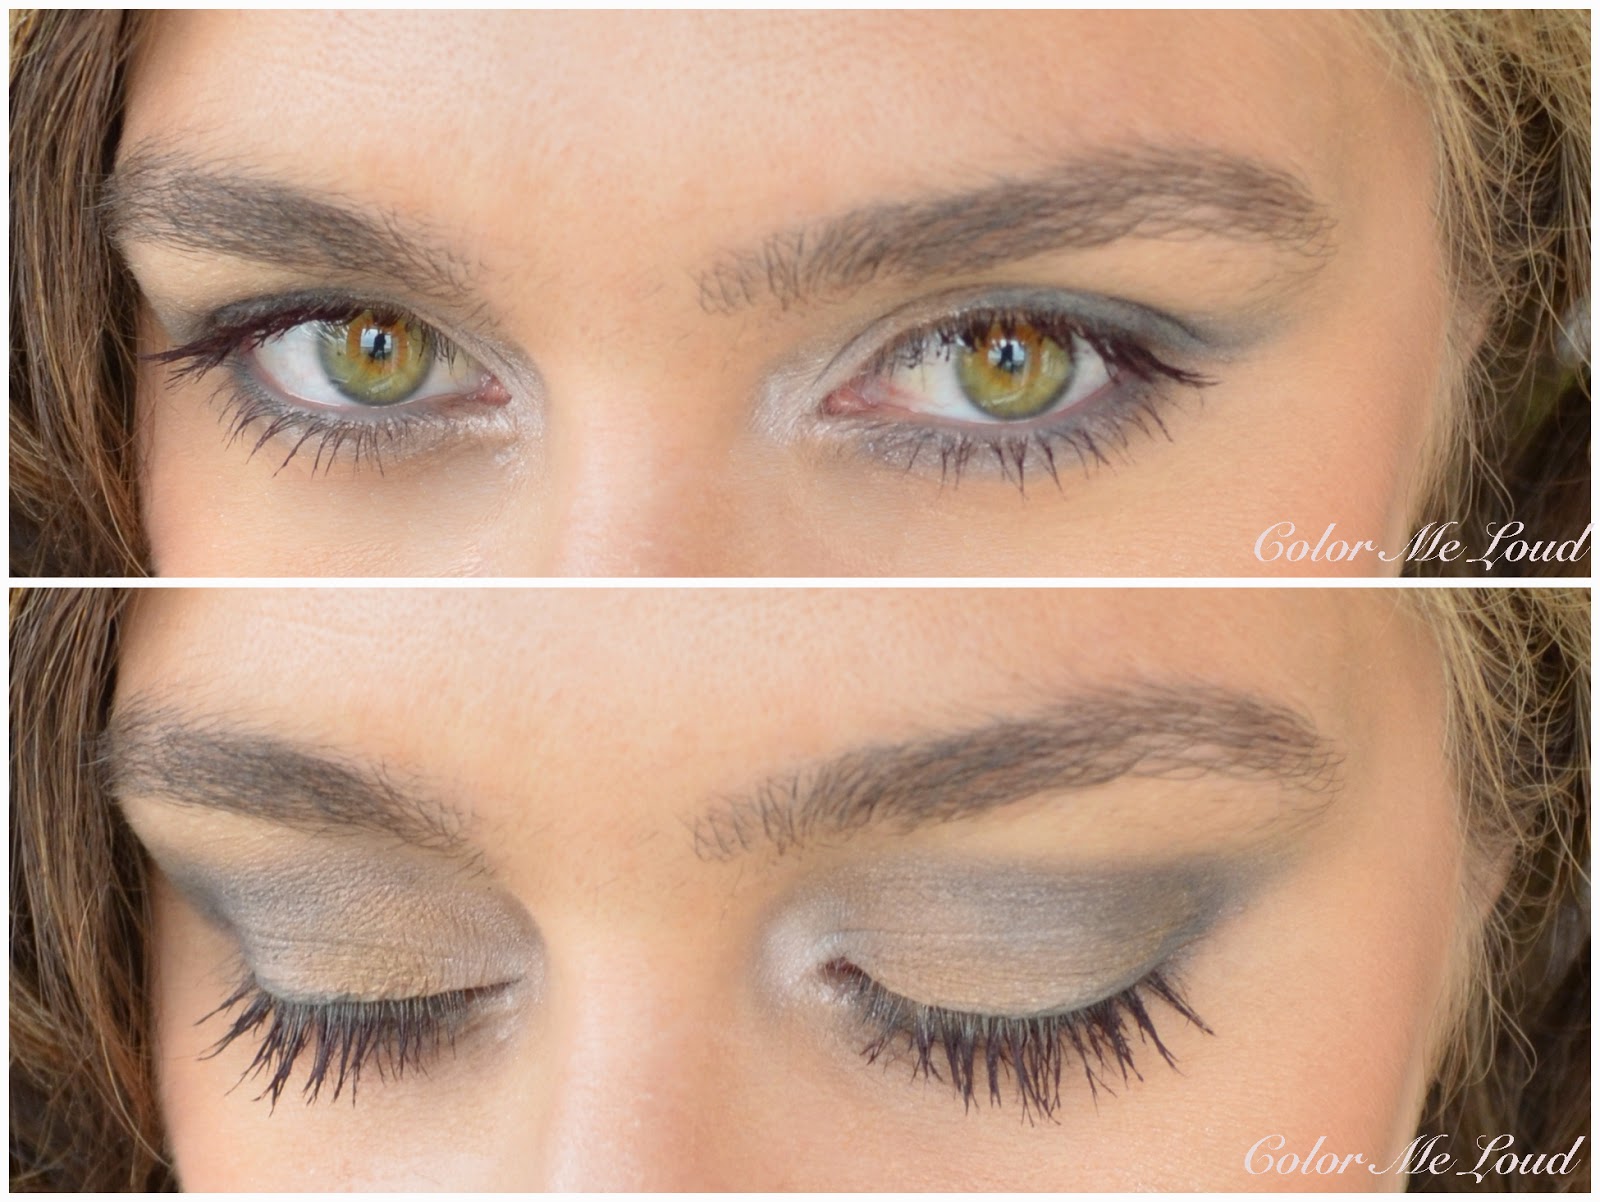 Chanel Les 5 Ombres Oiseaux de Nuit Eye Shadow Palette for Plumes  Précieuses Holiday 2014 Collection, Swatch, Review & FOTD